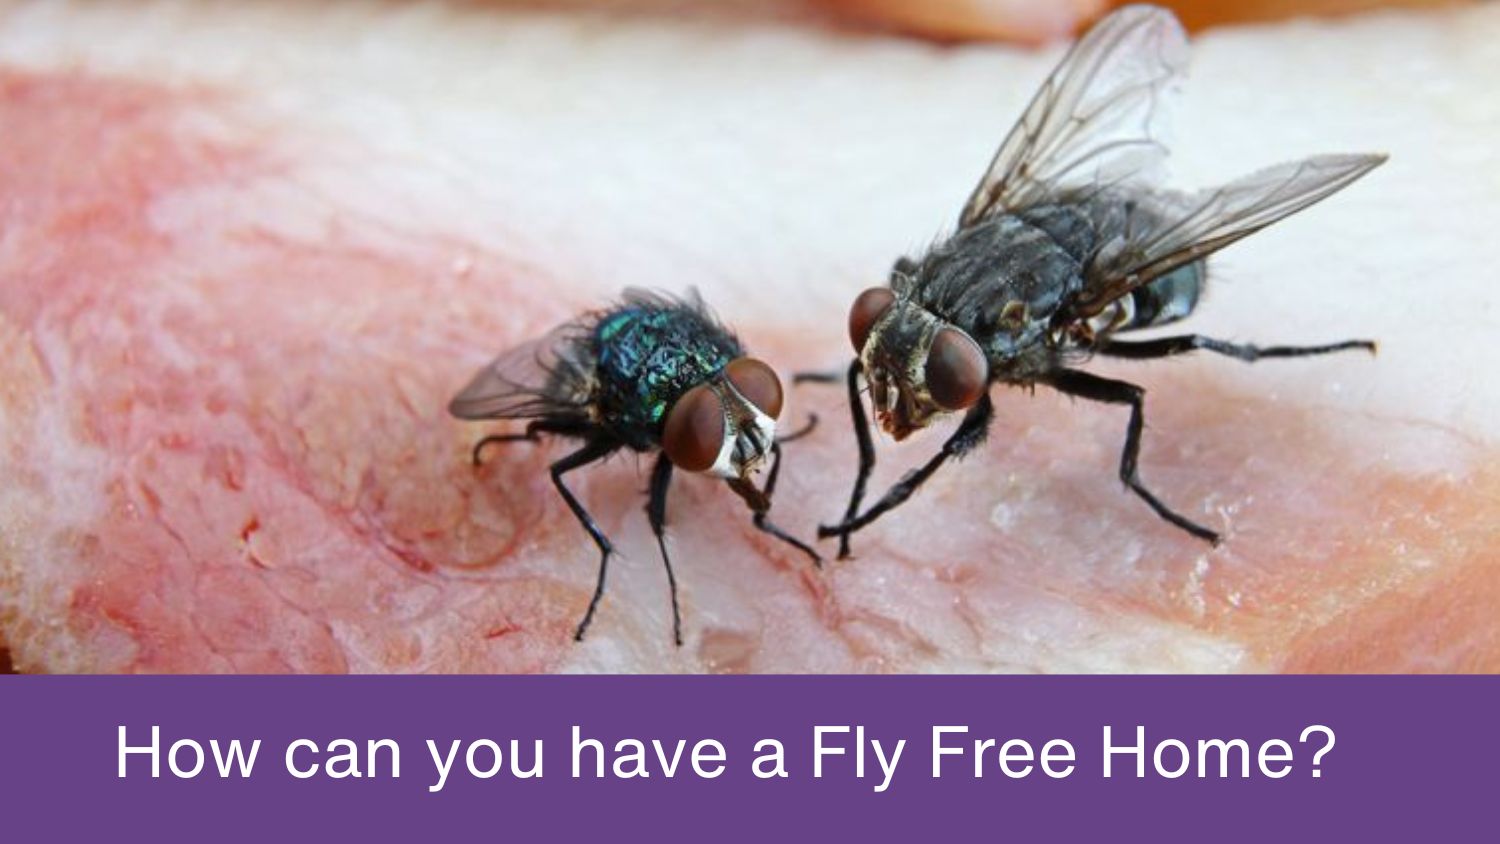 Tips to Keep Your Home Fly-Free